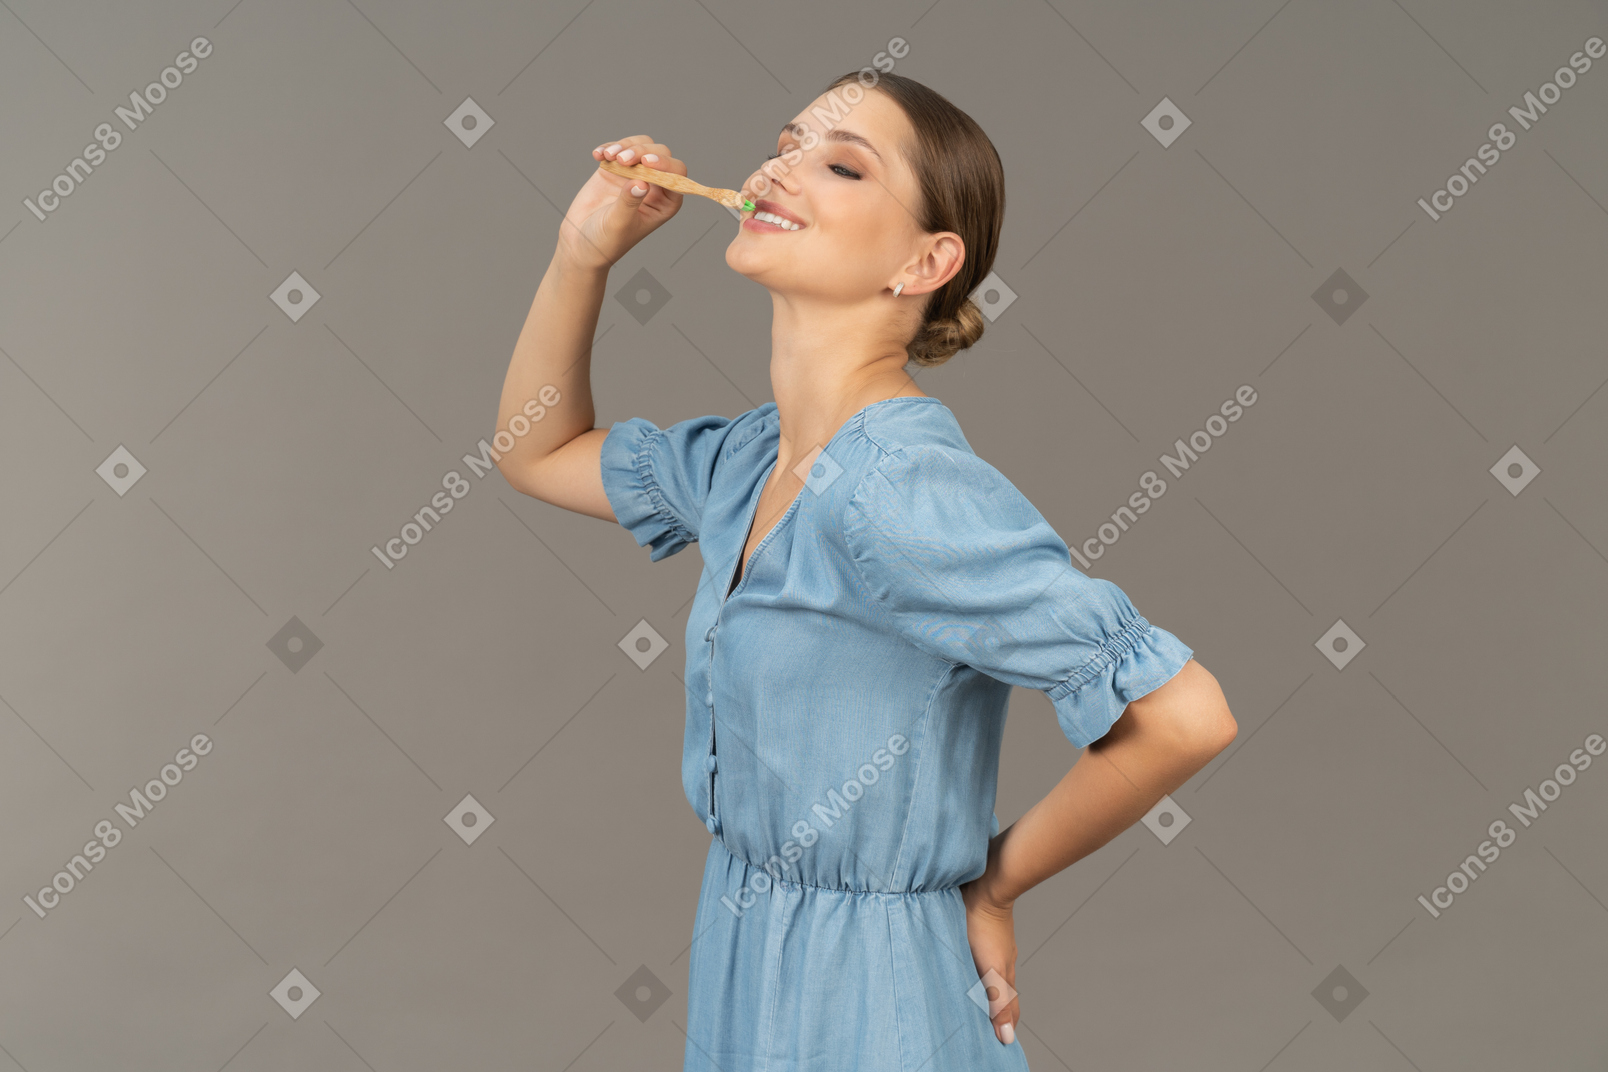 Three-quarter view of a young woman in blue dress brushing her teeth